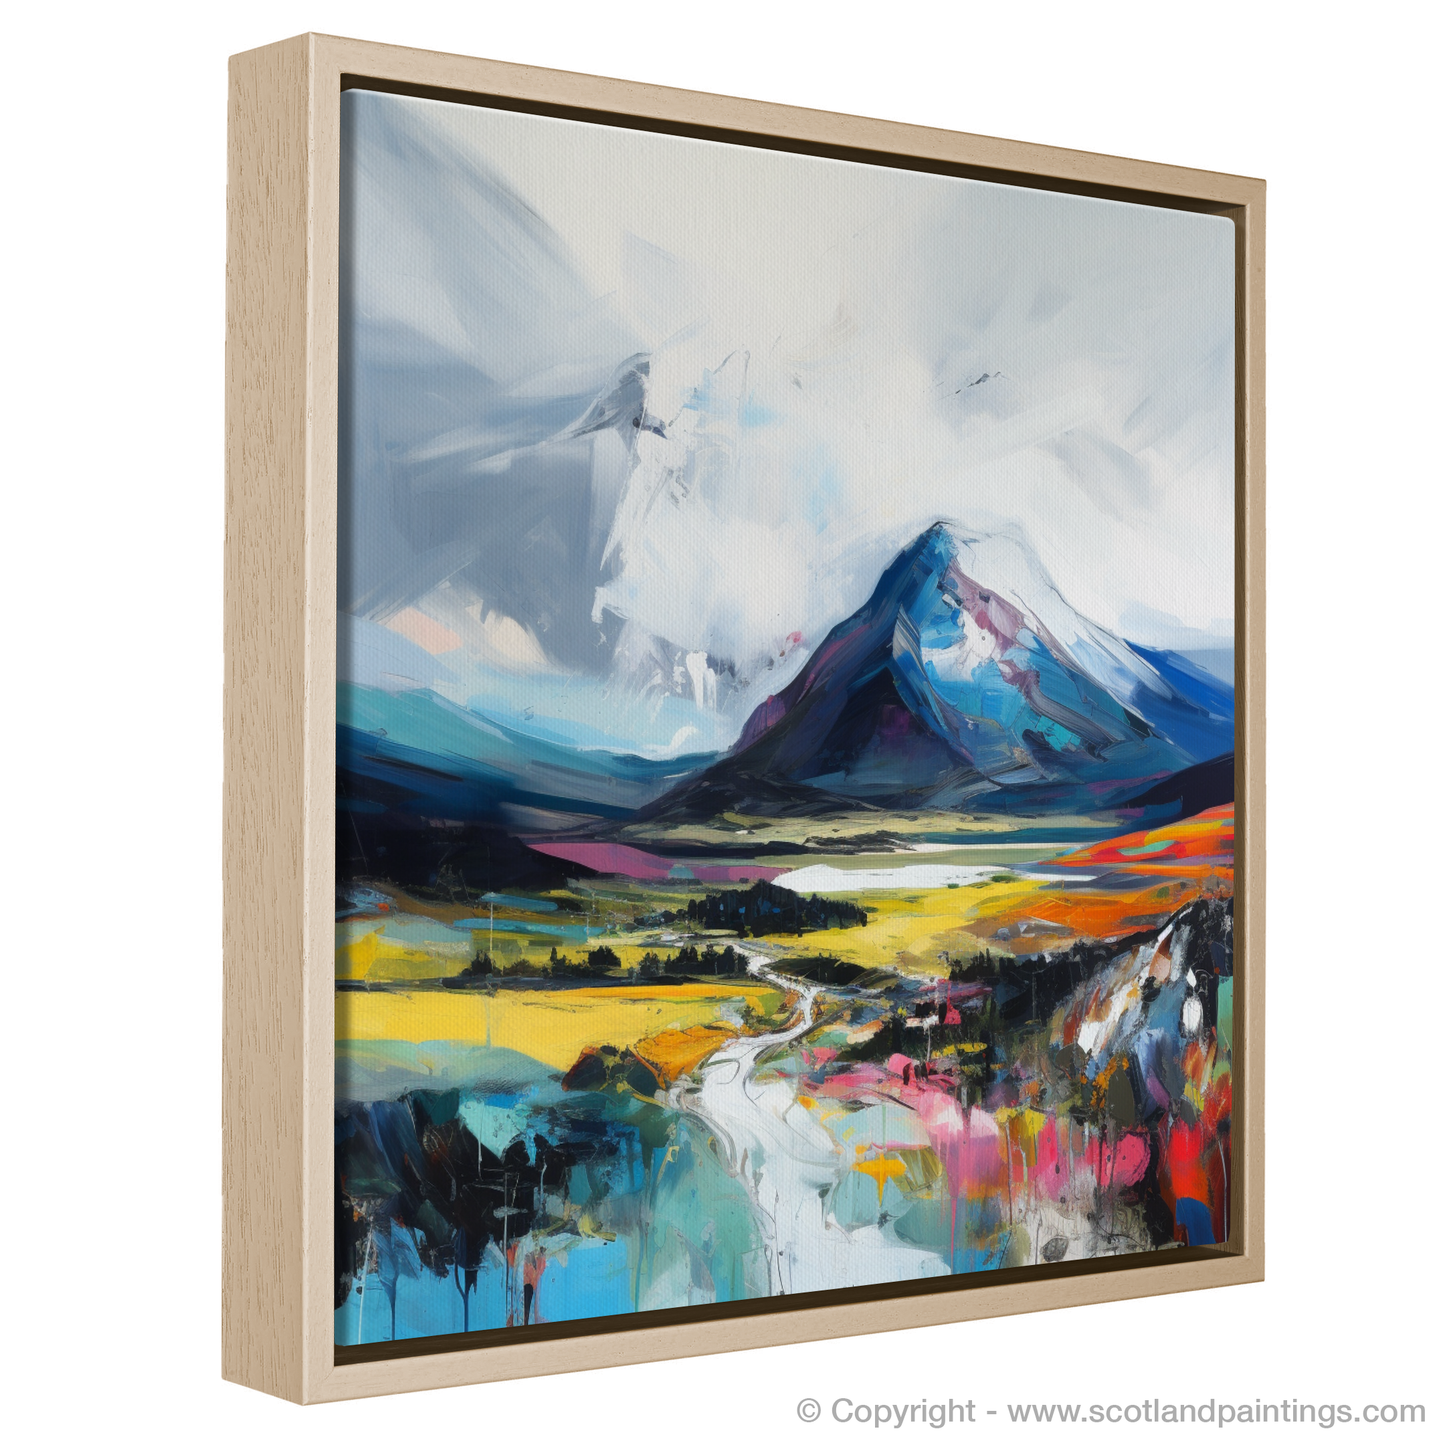 Painting and Art Print of Geal-chàrn (Drumochter) entitled "Mystic Summit: An Expressionist Journey through Geal-chàrn".